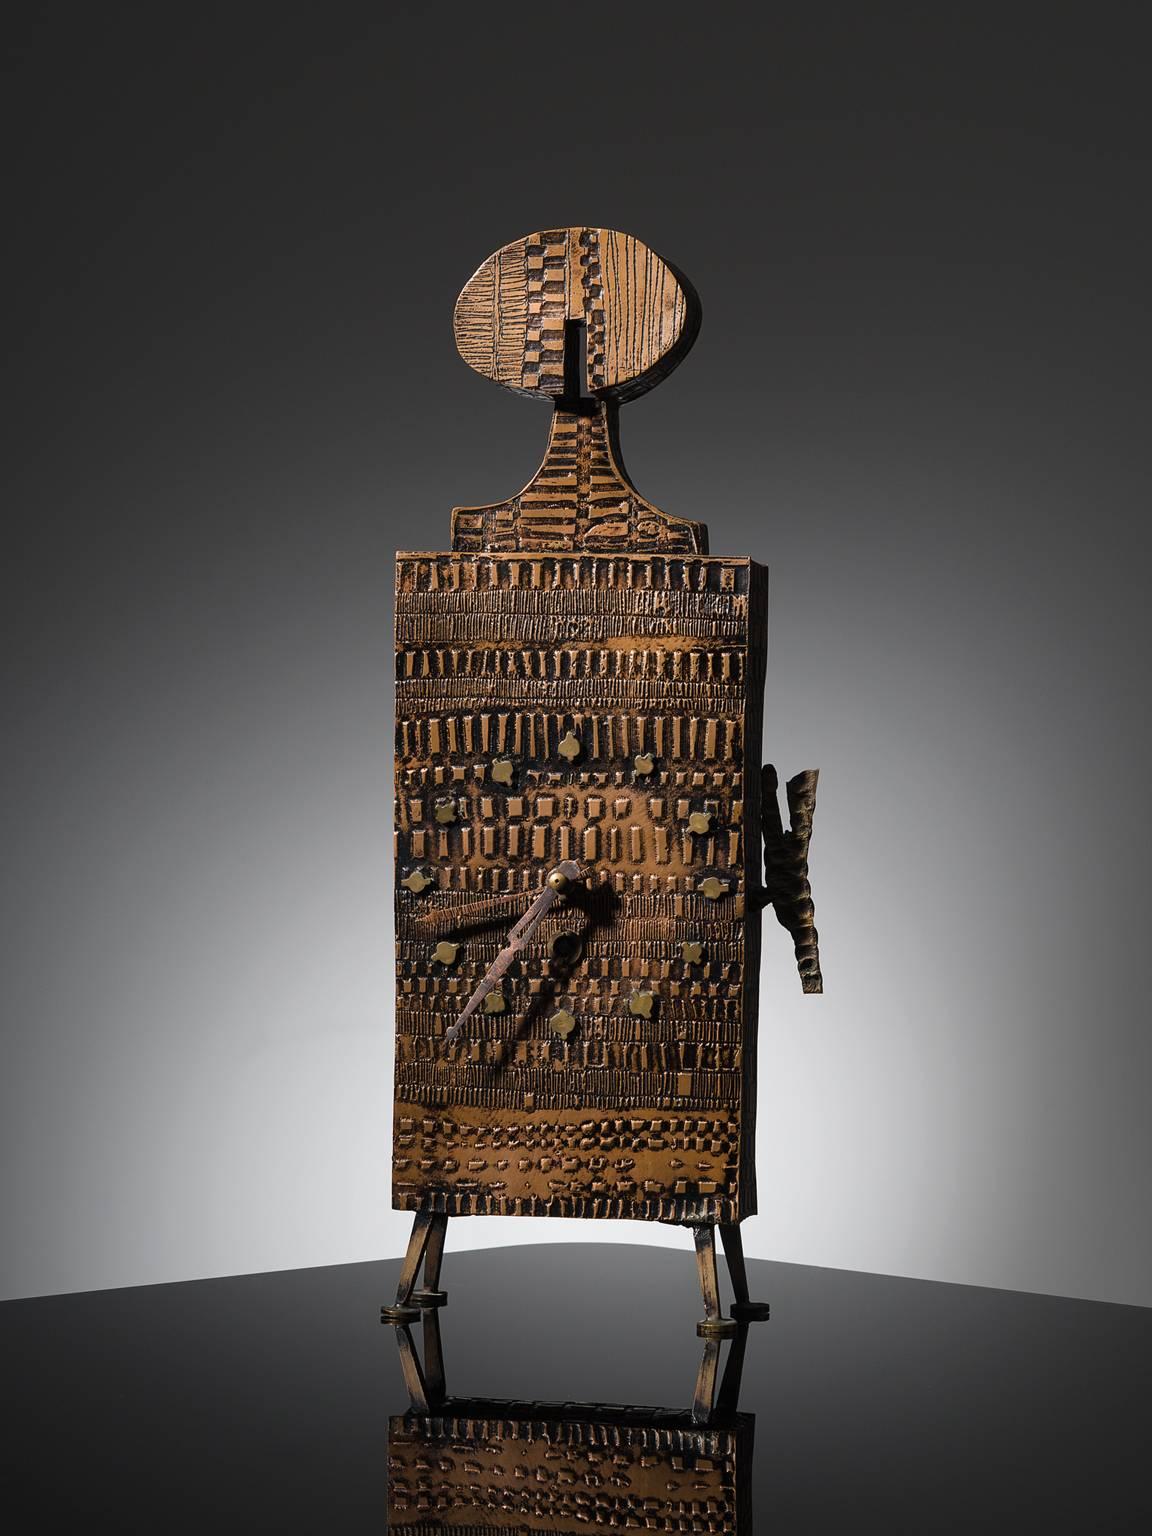 Lorenzo Burchiellaro, table clock, copper, brass, Italy, circa 1965

This figurative table clock is designed by Lorenzo Burchiellaro. This sculptural piece is executed with a copper body and has brass details such as the legs and dial. This